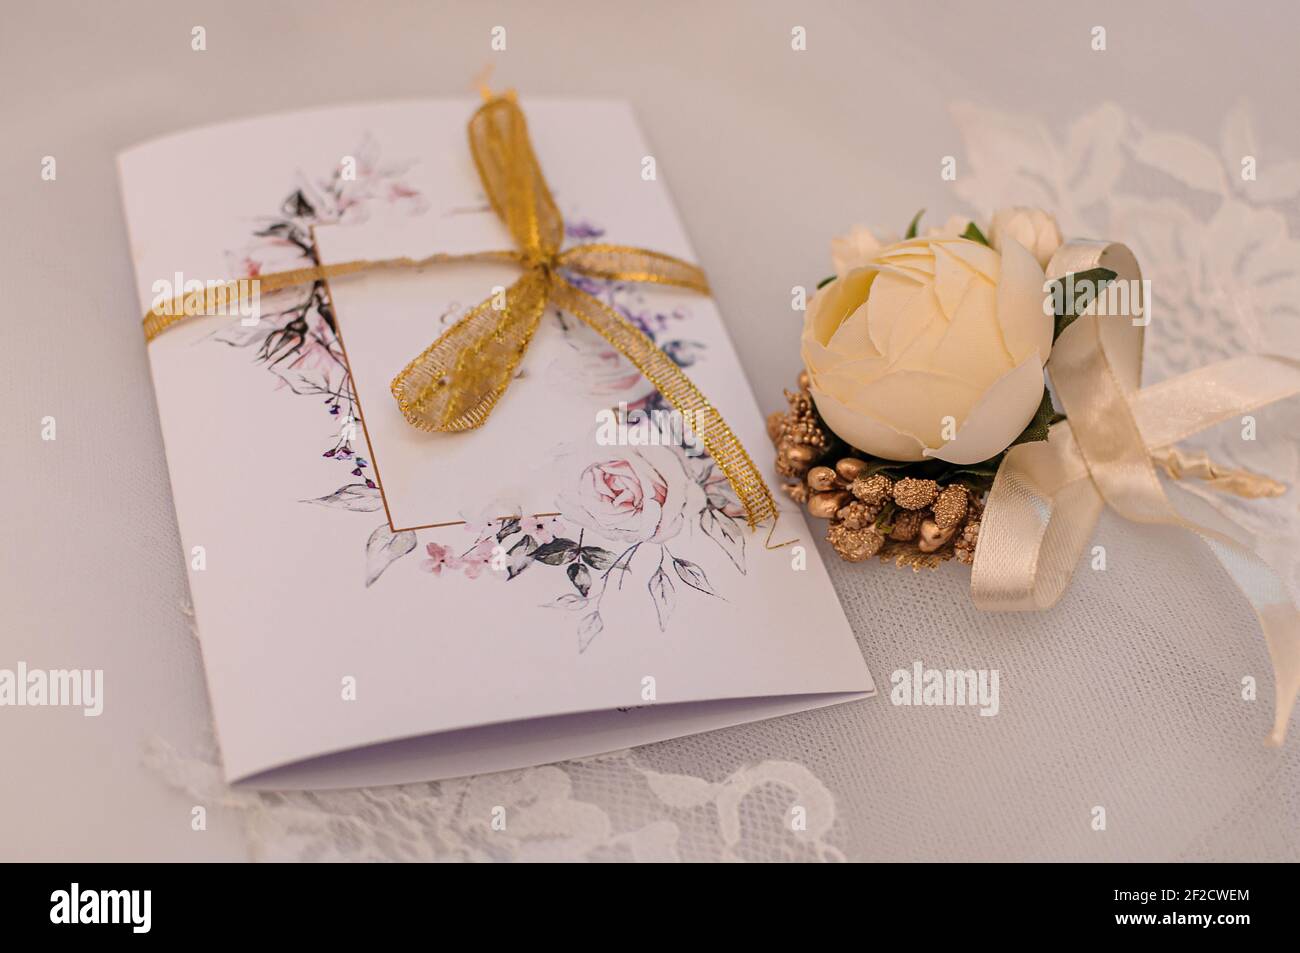 Groom boutonniere on white background Stock Photo